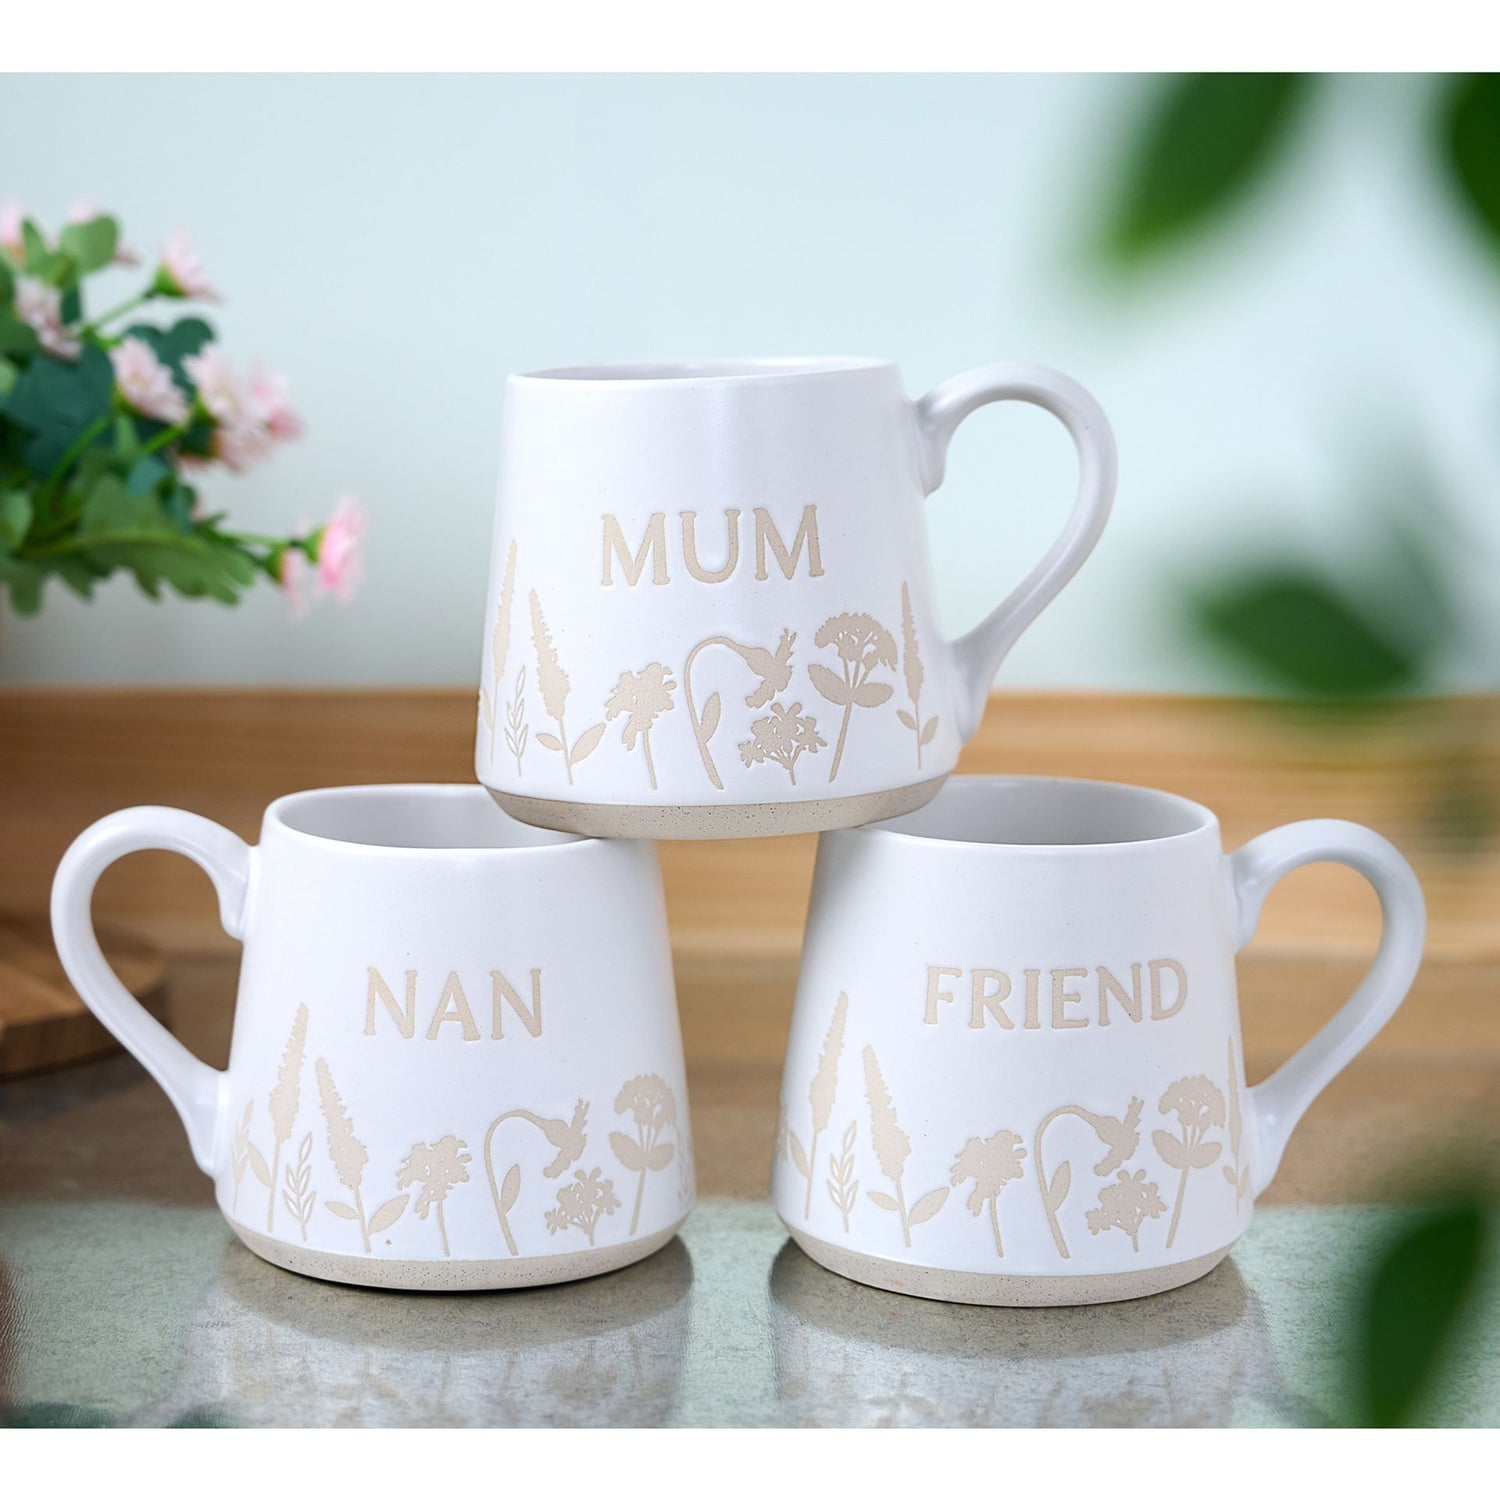 Trio Of Mugs From Same Range Shown Together